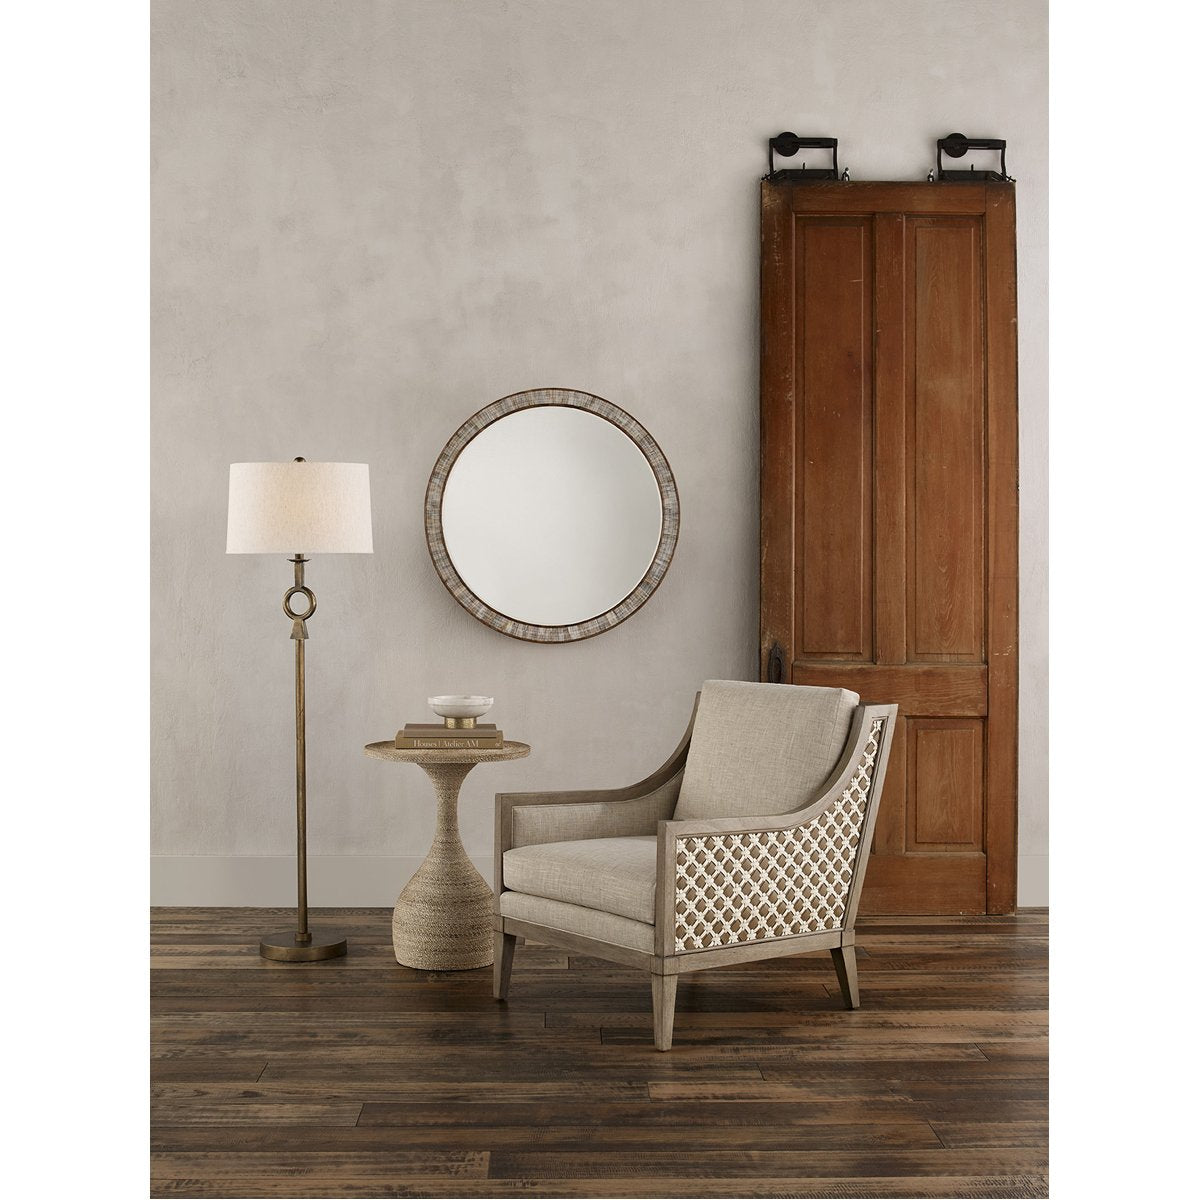 Currey and Company Germaine Floor Lamp